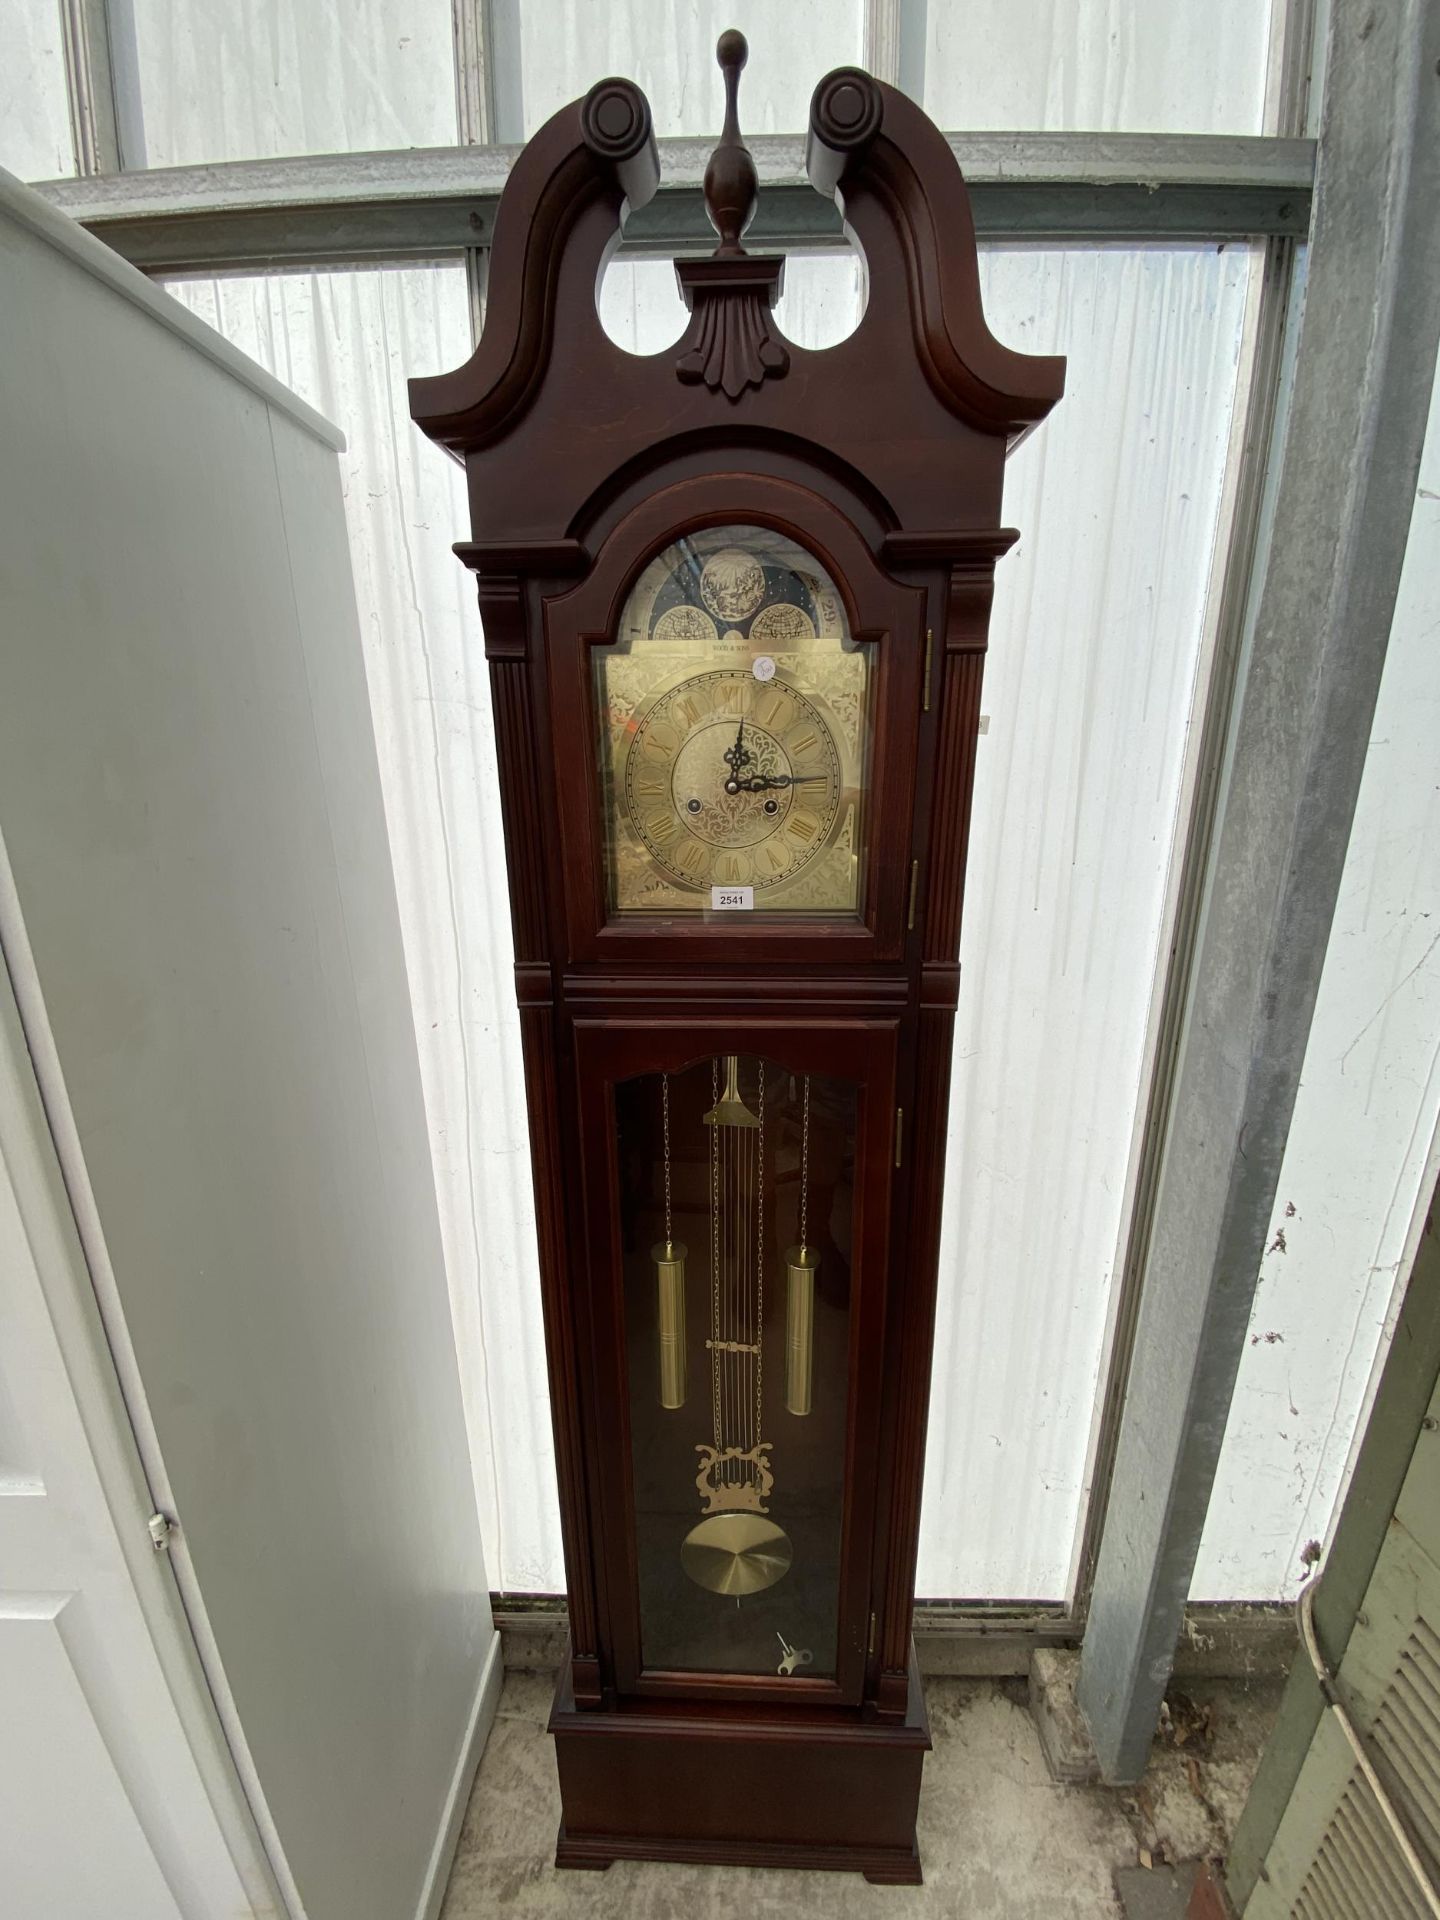 A WOOD & SONS LONGCASE CLOCK WITH BRASS DIAL, WEIGHTS, PENDULUM AND GLASS DOOR